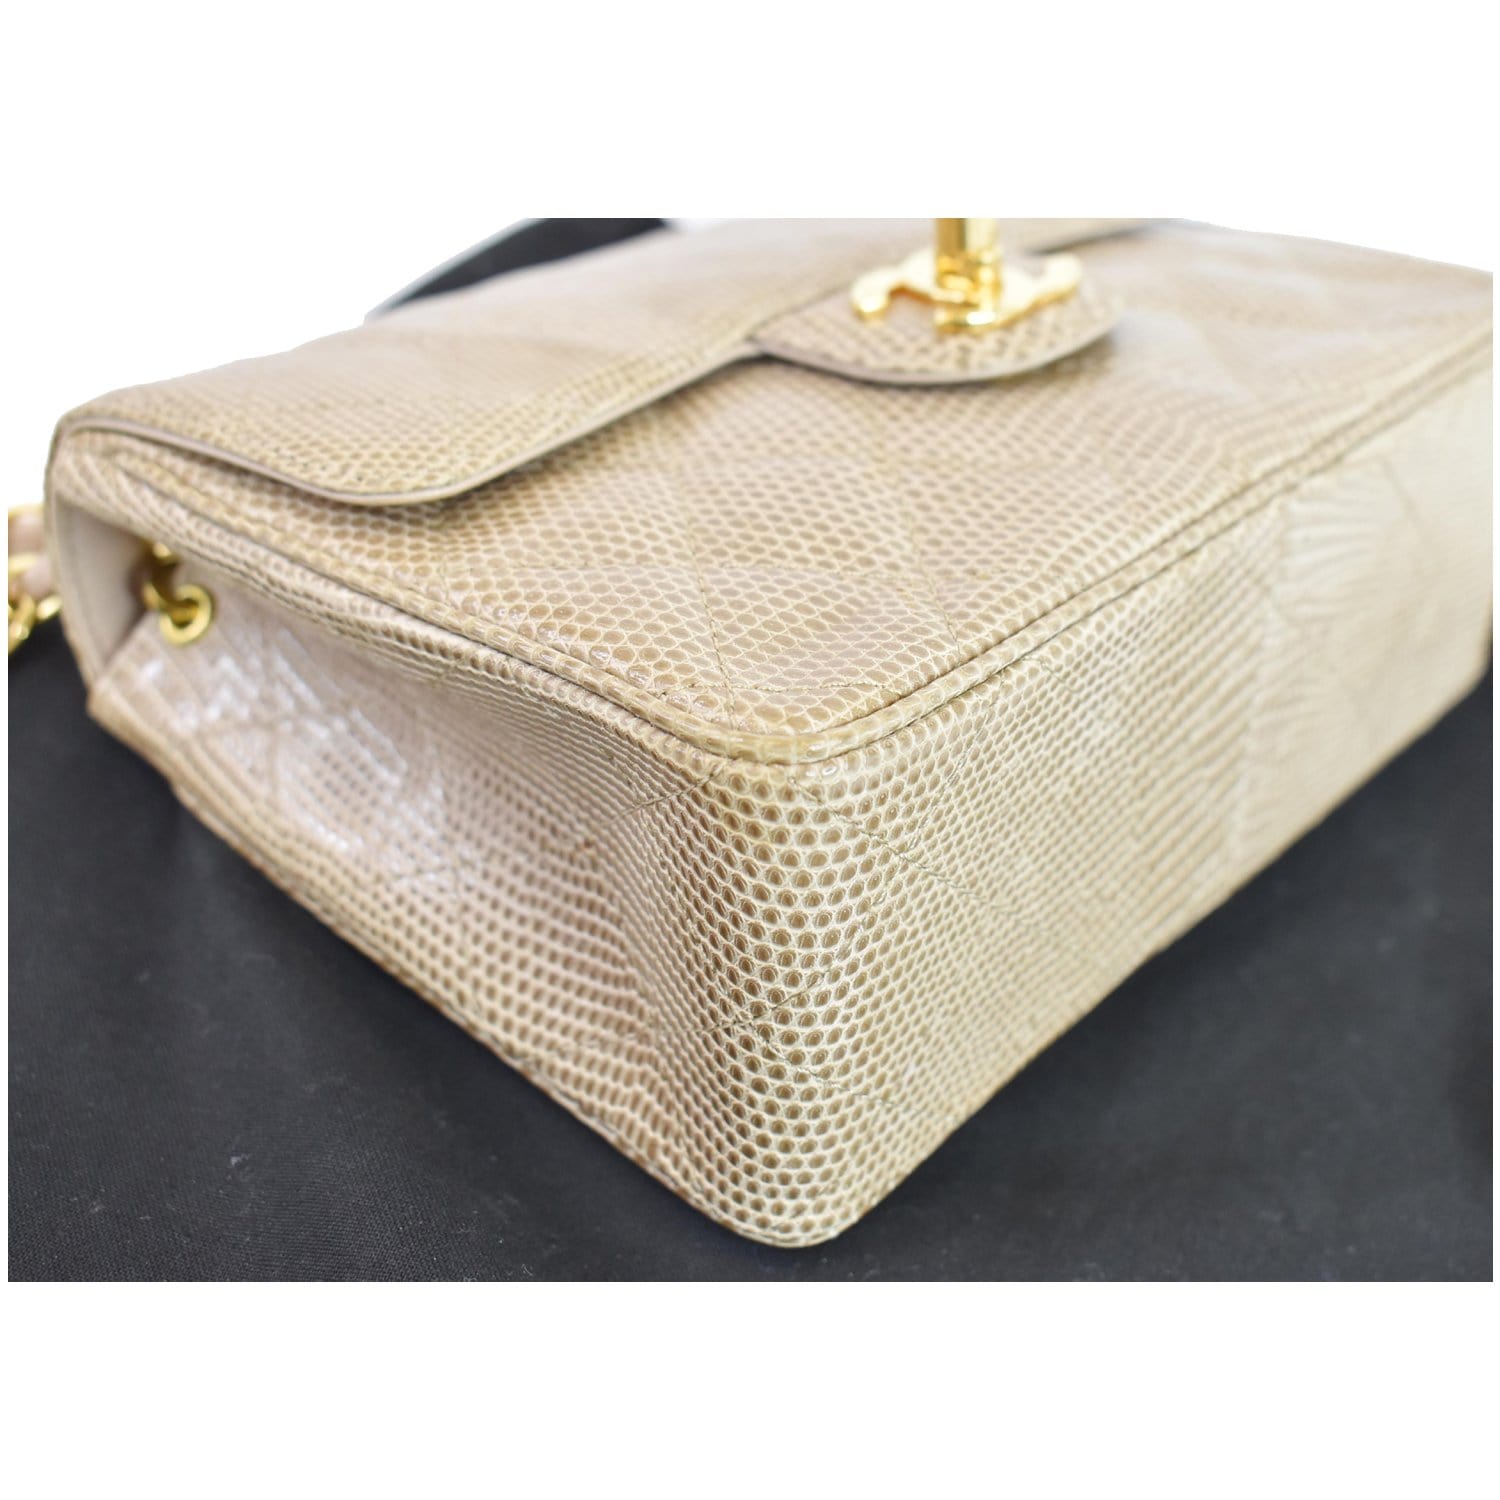 Chanel Vintage Beige Quilted Caviar Classic Flap Mini Square